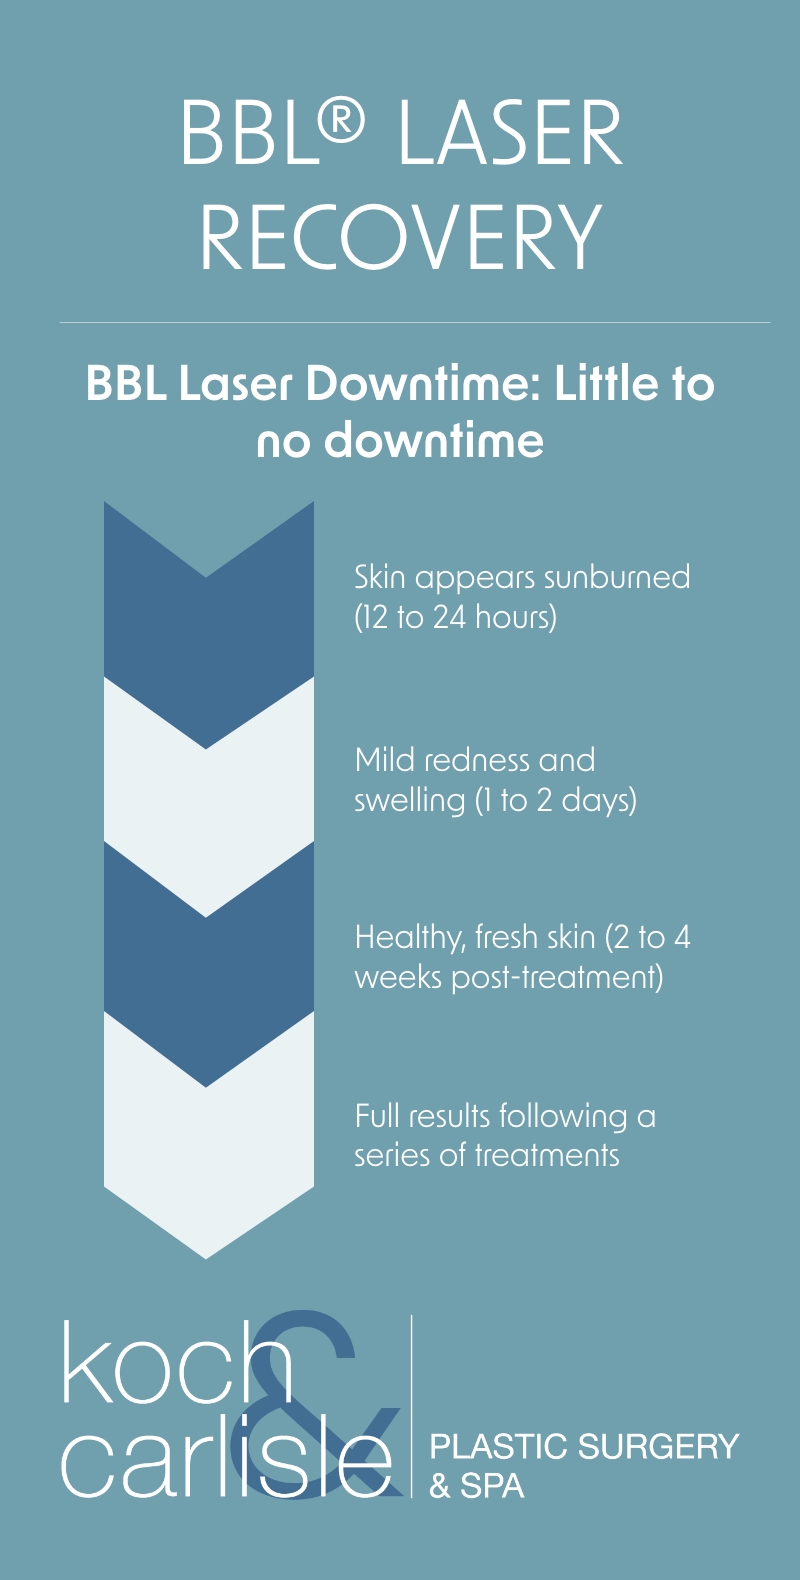 BBLⓇ LASER RECOVERY TIMELINE
BBL Laser Downtime: Little to no downtime.
Skin appears sunburned (12 to 24 hours)
Mild redness and swelling (1 to 2 days)
Healthy, fresh skin (2 to 4 weeks post-treatment)
Full results following a series of treatments